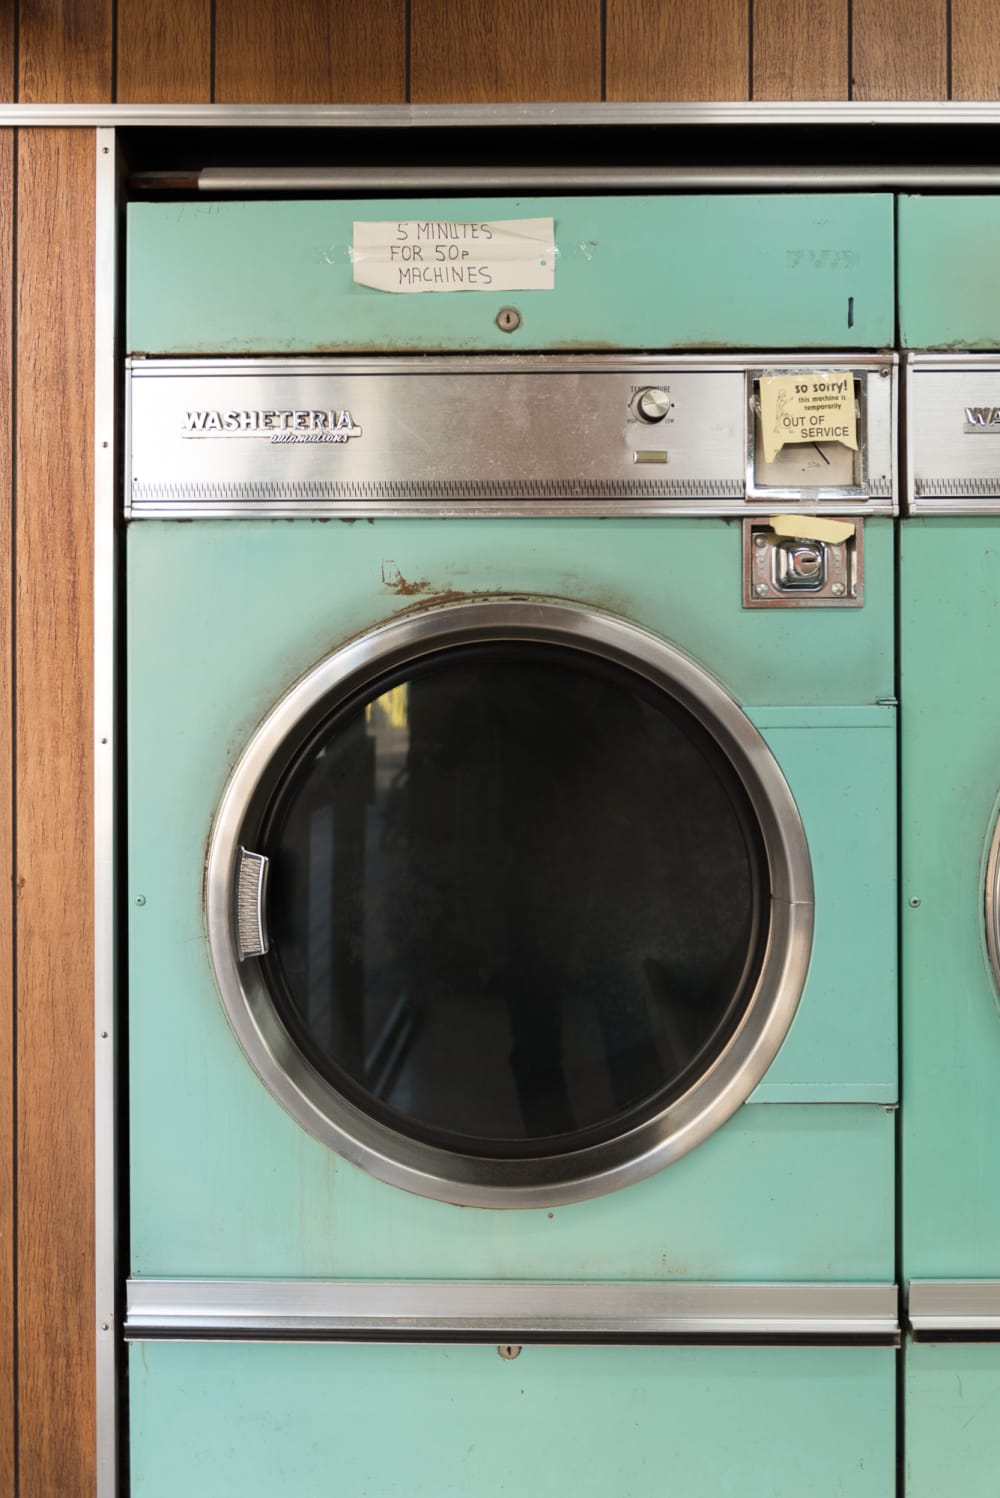 A photo of a vintage washing machine in a laundromat.